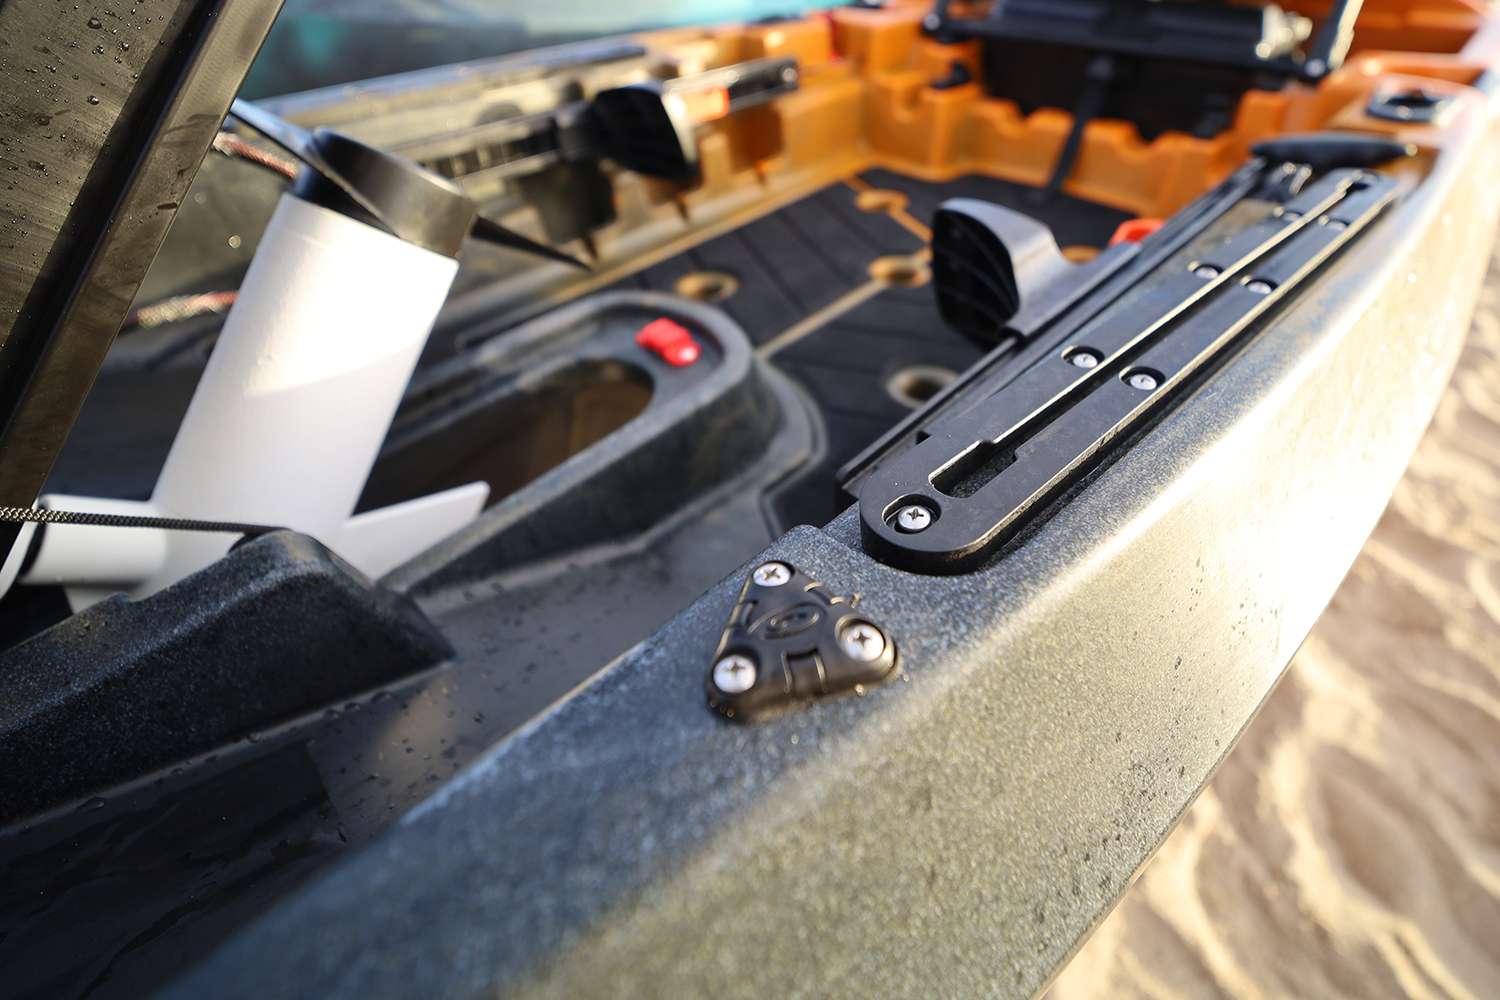 Accessory tracks are located on either side of the front, along with wire grommets to run cables for a fishfinder.